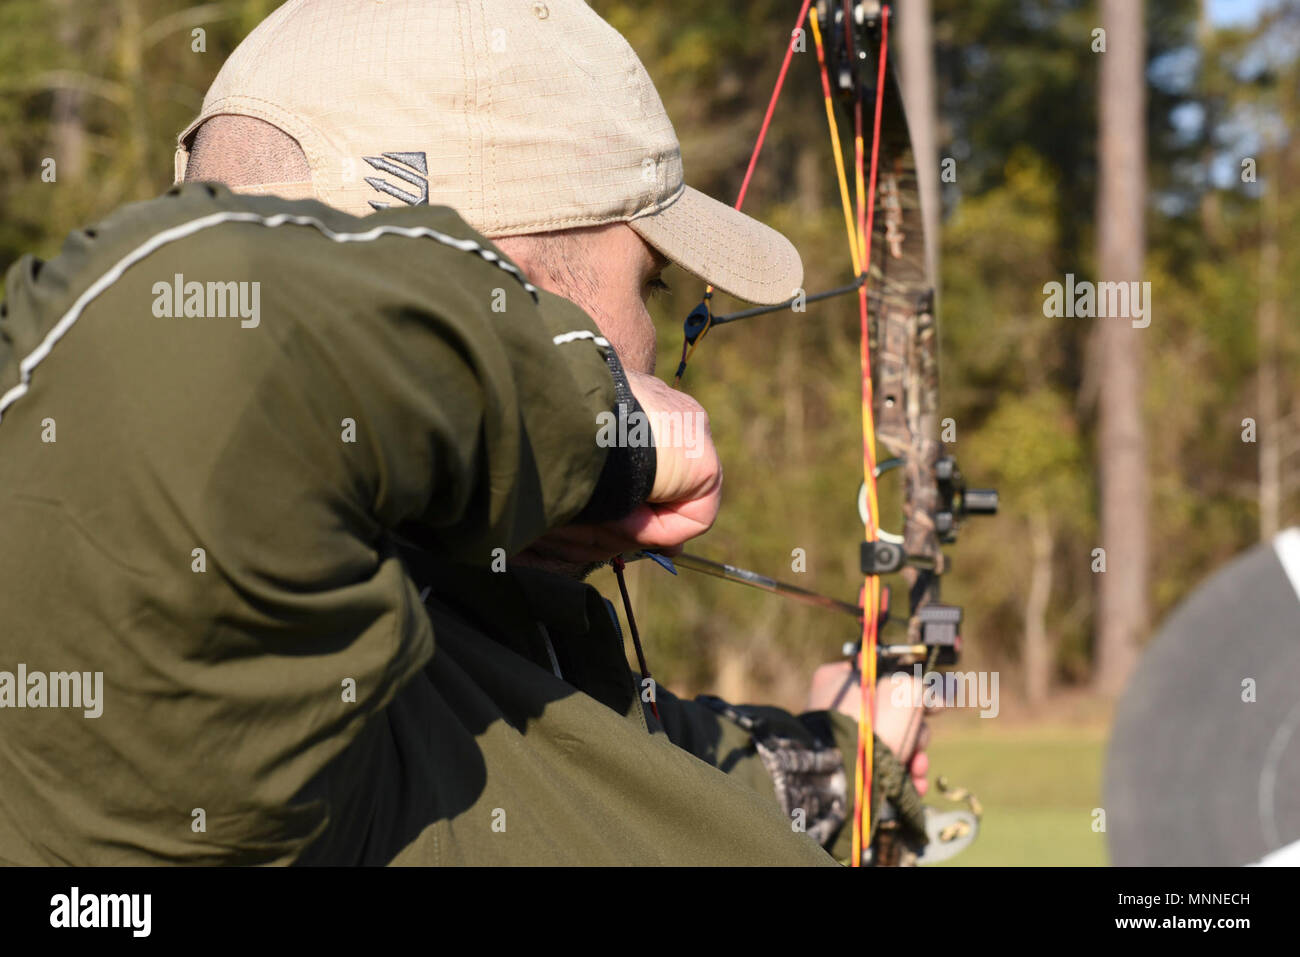 A 2018 Marine Corps Trials athlete draws his bow during an archery practice at Marine Corps Base Camp Lejeune, N.C., March 16, 2018. The Marine Corps Trials promotes recovery and rehabilitation through adaptive sport participation and develops camaraderie among recovering service members (RSMs) and veterans. It is an opportunity for RSMs to demonstrate their achievements and serves as the primary venue to select Marine Corps participants for the DoD Warrior Games. Stock Photo